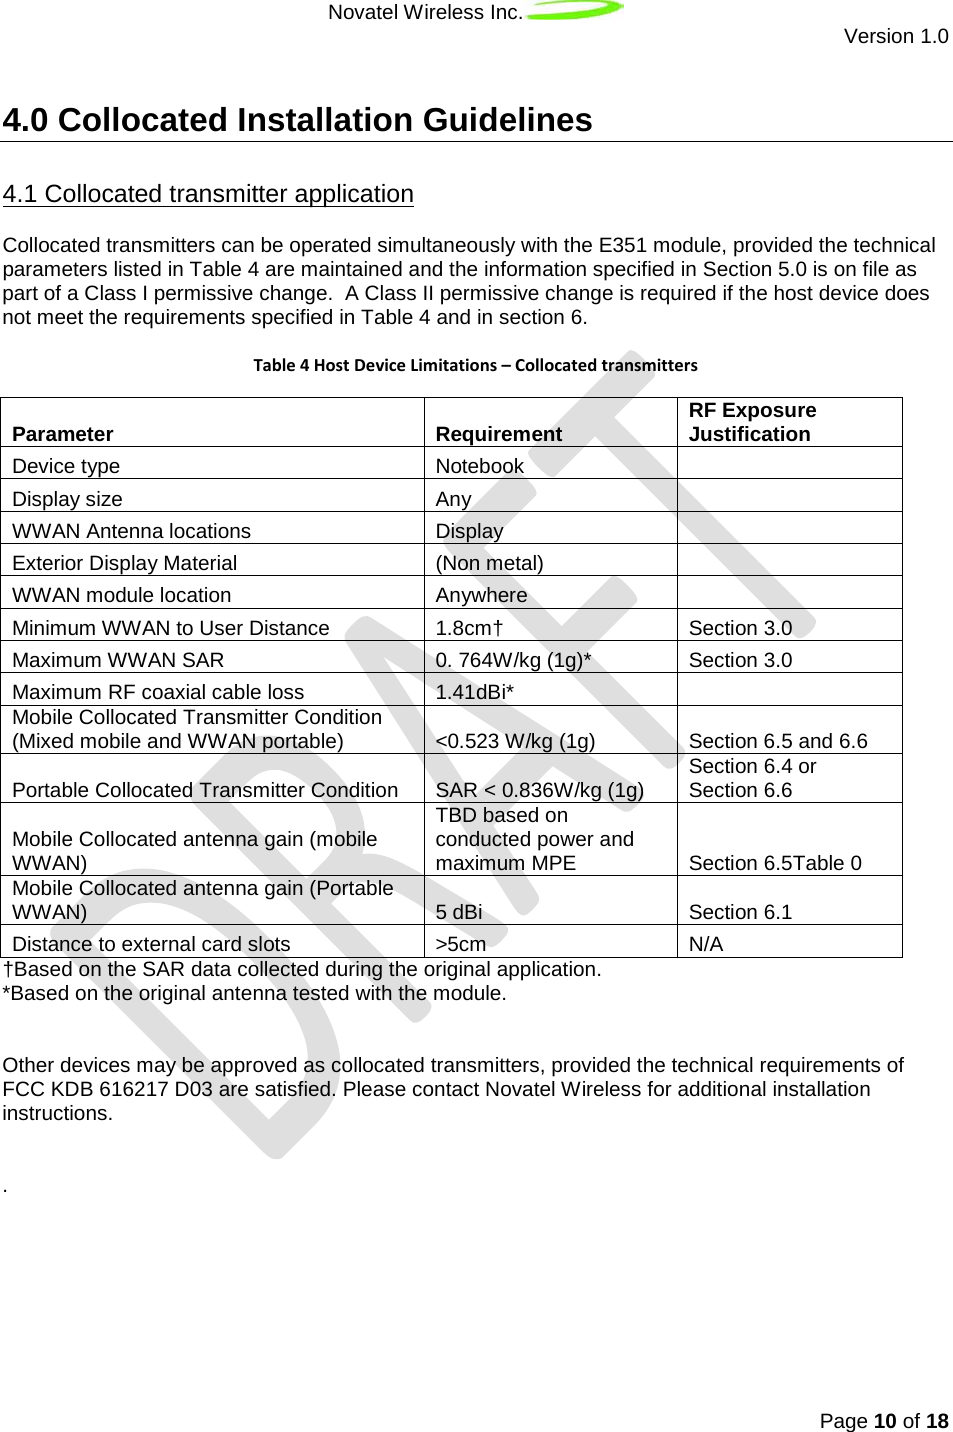 Novatel Wireless Inc.  Version 1.0   Page 10 of 18  4.0 Collocated Installation Guidelines Collocated transmitters can be operated simultaneously with the E351 module, provided the technical parameters listed in Table 4 are maintained and the information specified in Section 5.0 is on file as part of a Class I permissive change.  A Class II permissive change is required if the host device does not meet the requirements specified in Table 4 and in section 6. 4.1 Collocated transmitter application  Table 4 Host Device Limitations – Collocated transmitters Parameter Requirement RF Exposure Justification Device type Notebook  Display size Any  WWAN Antenna locations Display  Exterior Display Material (Non metal)  WWAN module location Anywhere  Minimum WWAN to User Distance 1.8cm† Section 3.0 Maximum WWAN SAR 0. 764W/kg (1g)* Section 3.0 Maximum RF coaxial cable loss 1.41dBi*  Mobile Collocated Transmitter Condition (Mixed mobile and WWAN portable) &lt;0.523 W/kg (1g) Section 6.5 and 6.6 Portable Collocated Transmitter Condition SAR &lt; 0.836W/kg (1g) Section 6.4 or Section 6.6 Mobile Collocated antenna gain (mobile WWAN) TBD based on conducted power and maximum MPE Section 6.5Table 0 Mobile Collocated antenna gain (Portable  WWAN) 5 dBi Section 6.1 Distance to external card slots &gt;5cm N/A †Based on the SAR data collected during the original application. *Based on the original antenna tested with the module.    Other devices may be approved as collocated transmitters, provided the technical requirements of FCC KDB 616217 D03 are satisfied. Please contact Novatel Wireless for additional installation instructions.   .